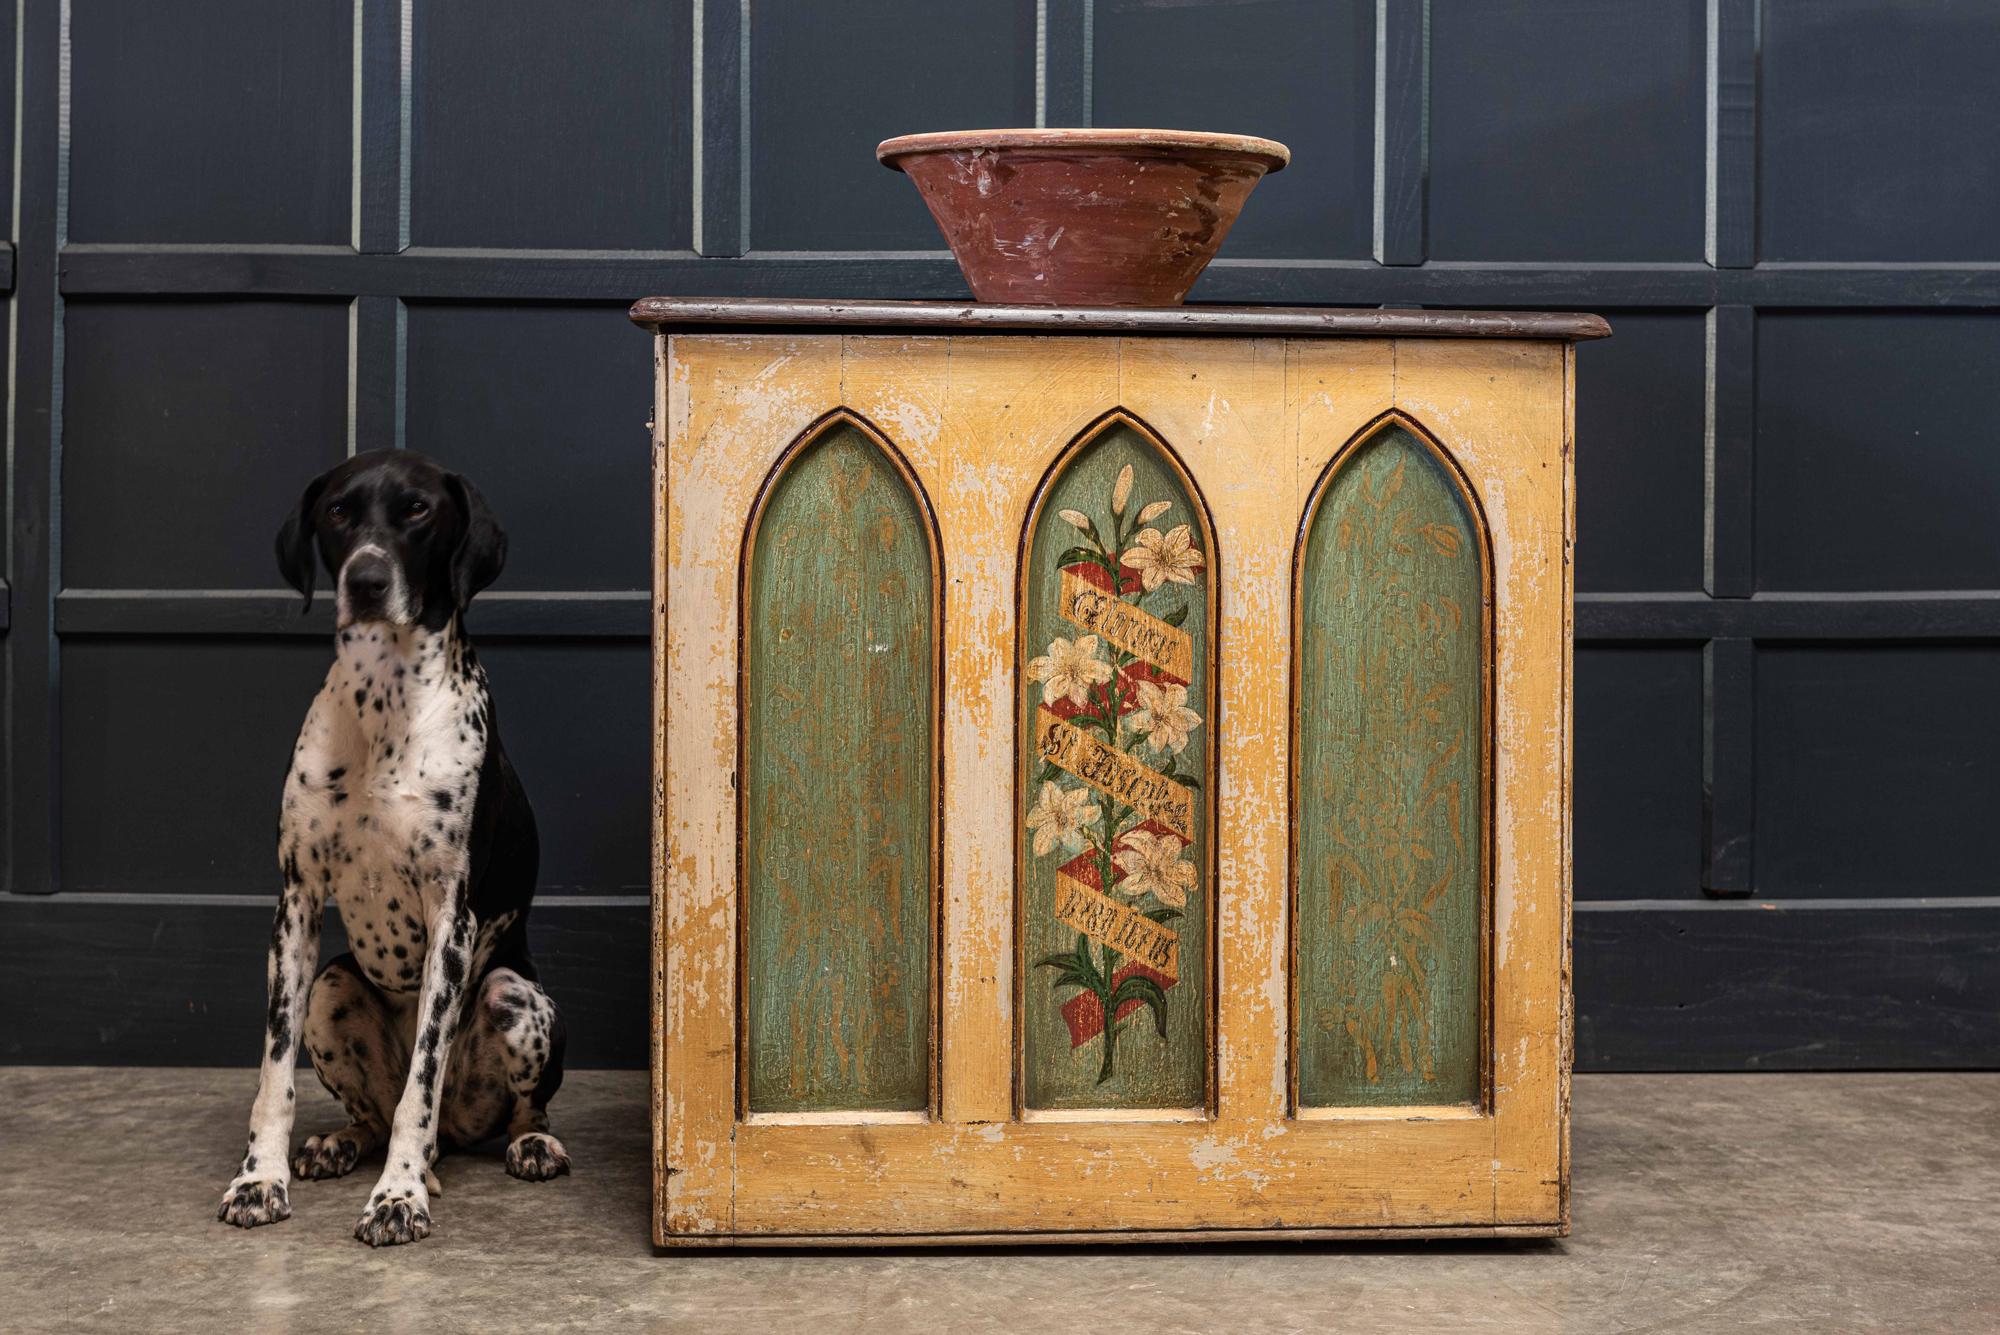 English 19th century decorative painted chapel cupboard
circa 1860.

The 3 Gothic arc panels, painted with a dark green ground and the flanking arches have faded gilding and quite a faint quatrefoil design, reminiscent of Pugin. The stand out